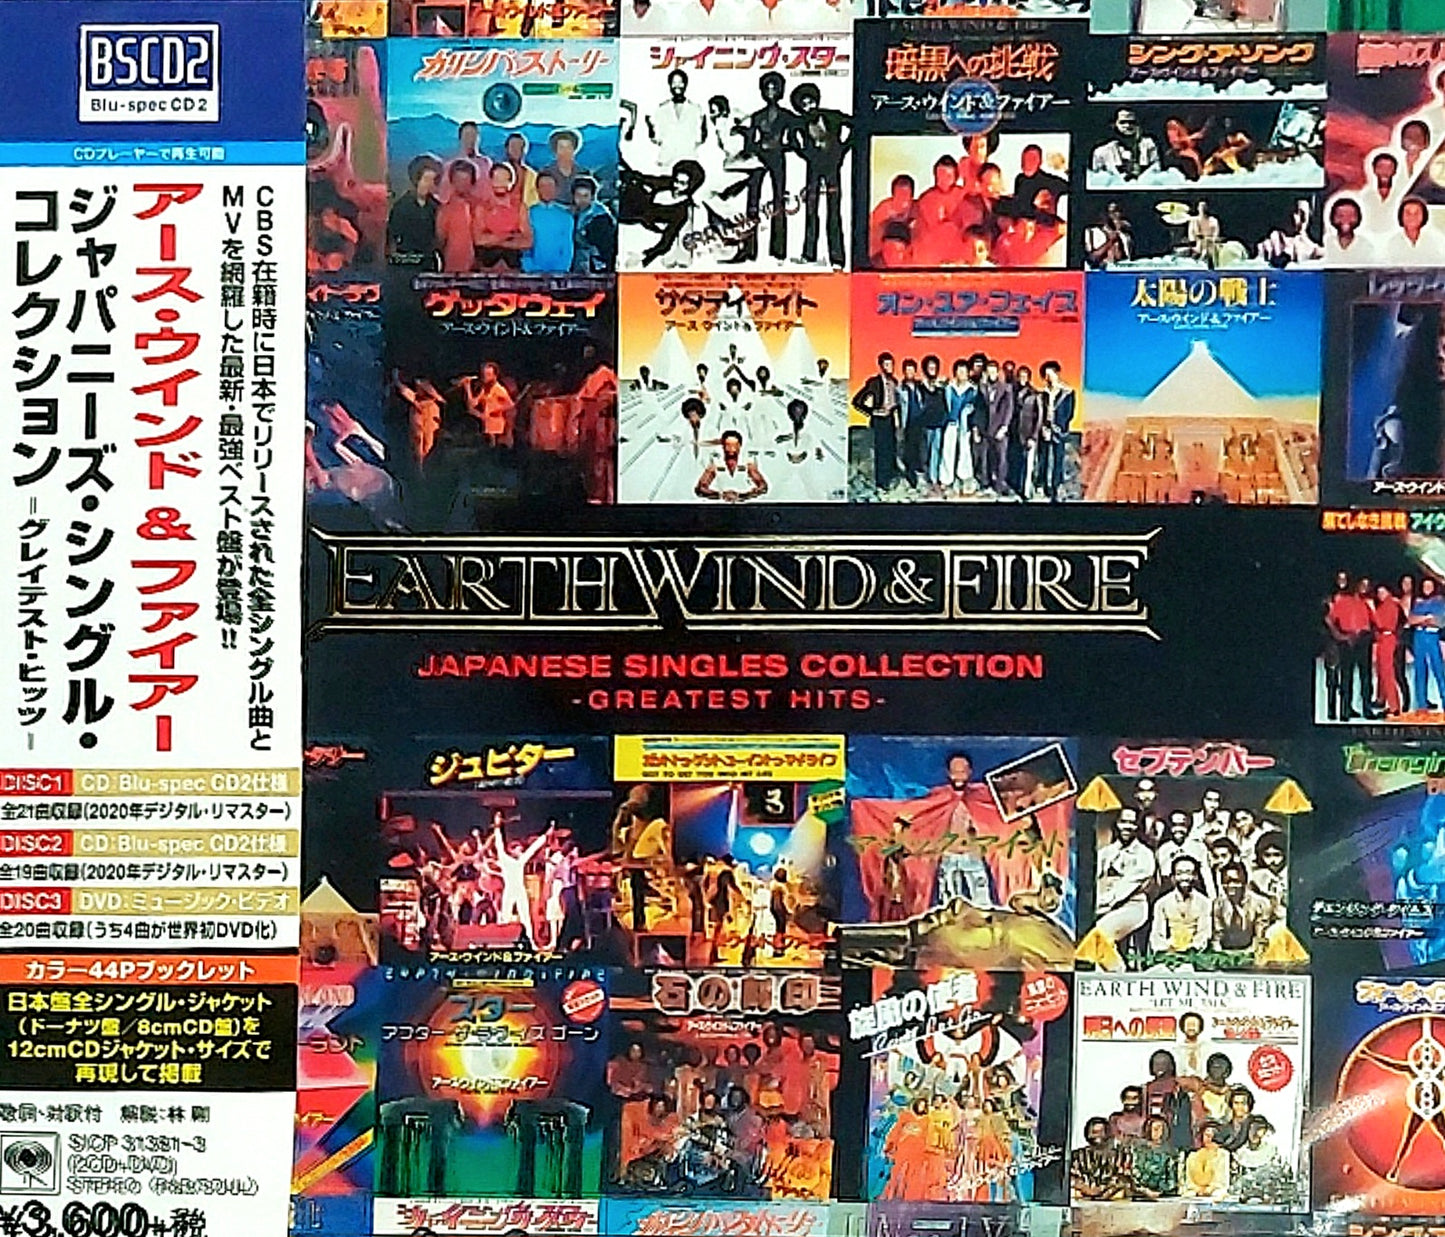 Earth Wind & Fire: Japan Singles Collection 2CD+DVD